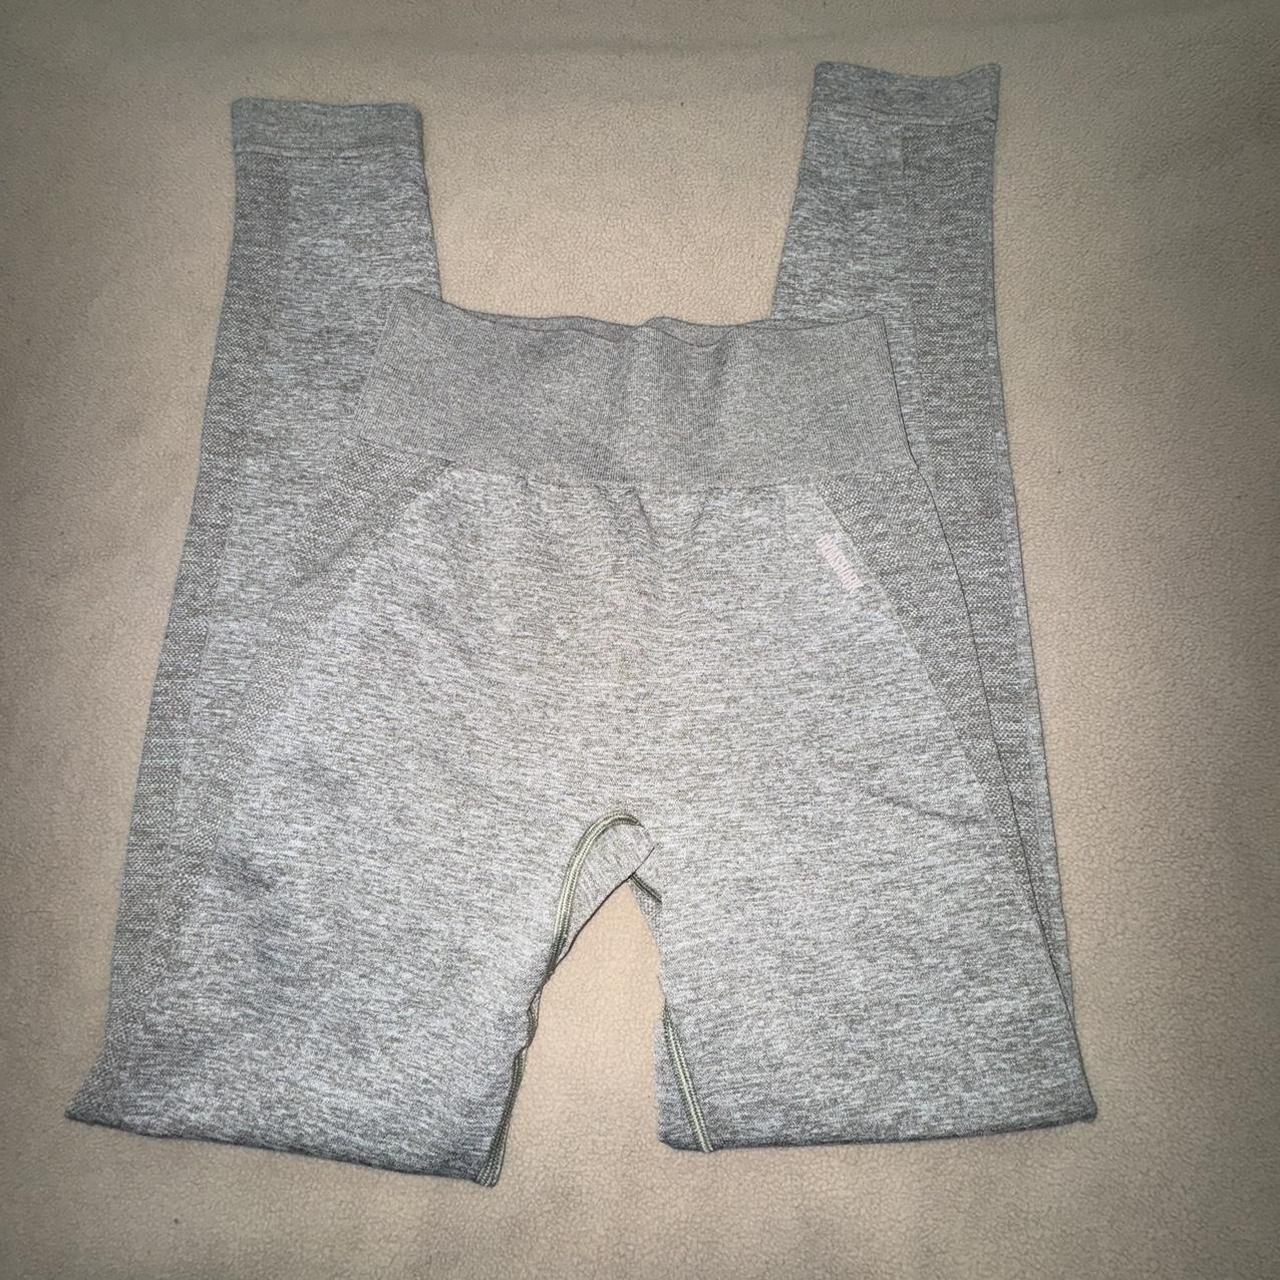 Size small, light greenish/grey and pink gymshark